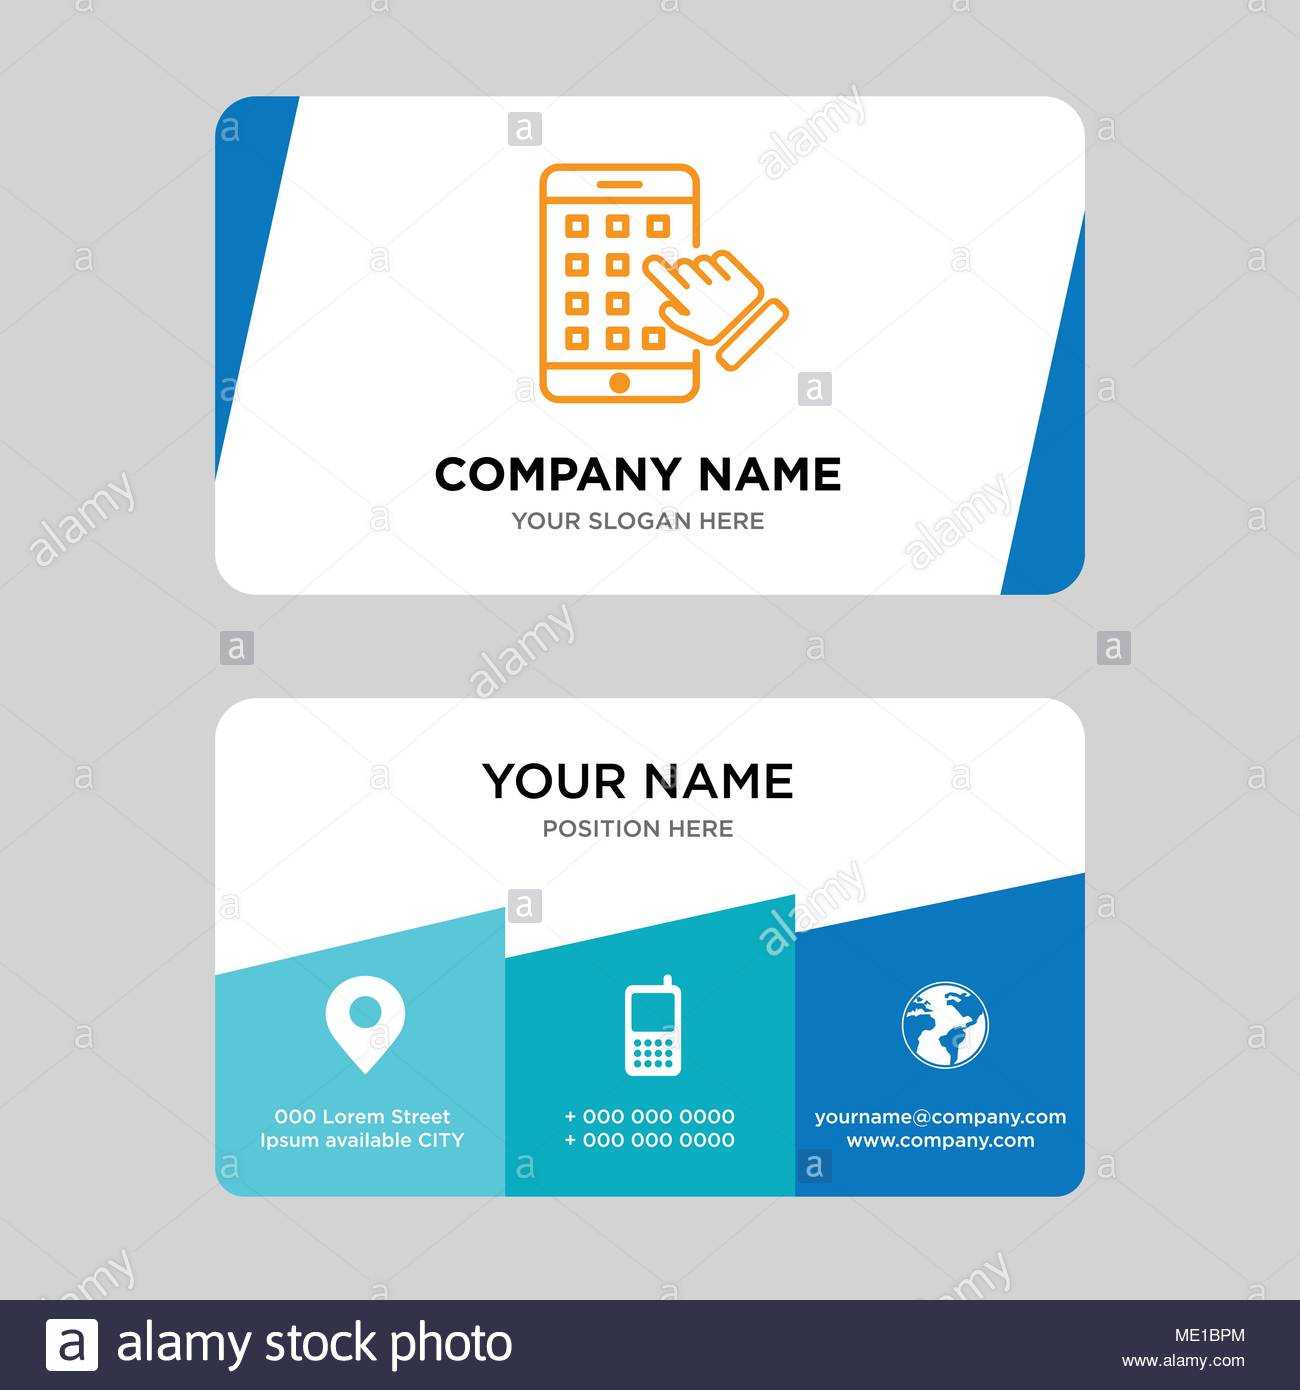 Iphone Business Card Design Template, Visiting For Your Pertaining To Iphone Business Card Template